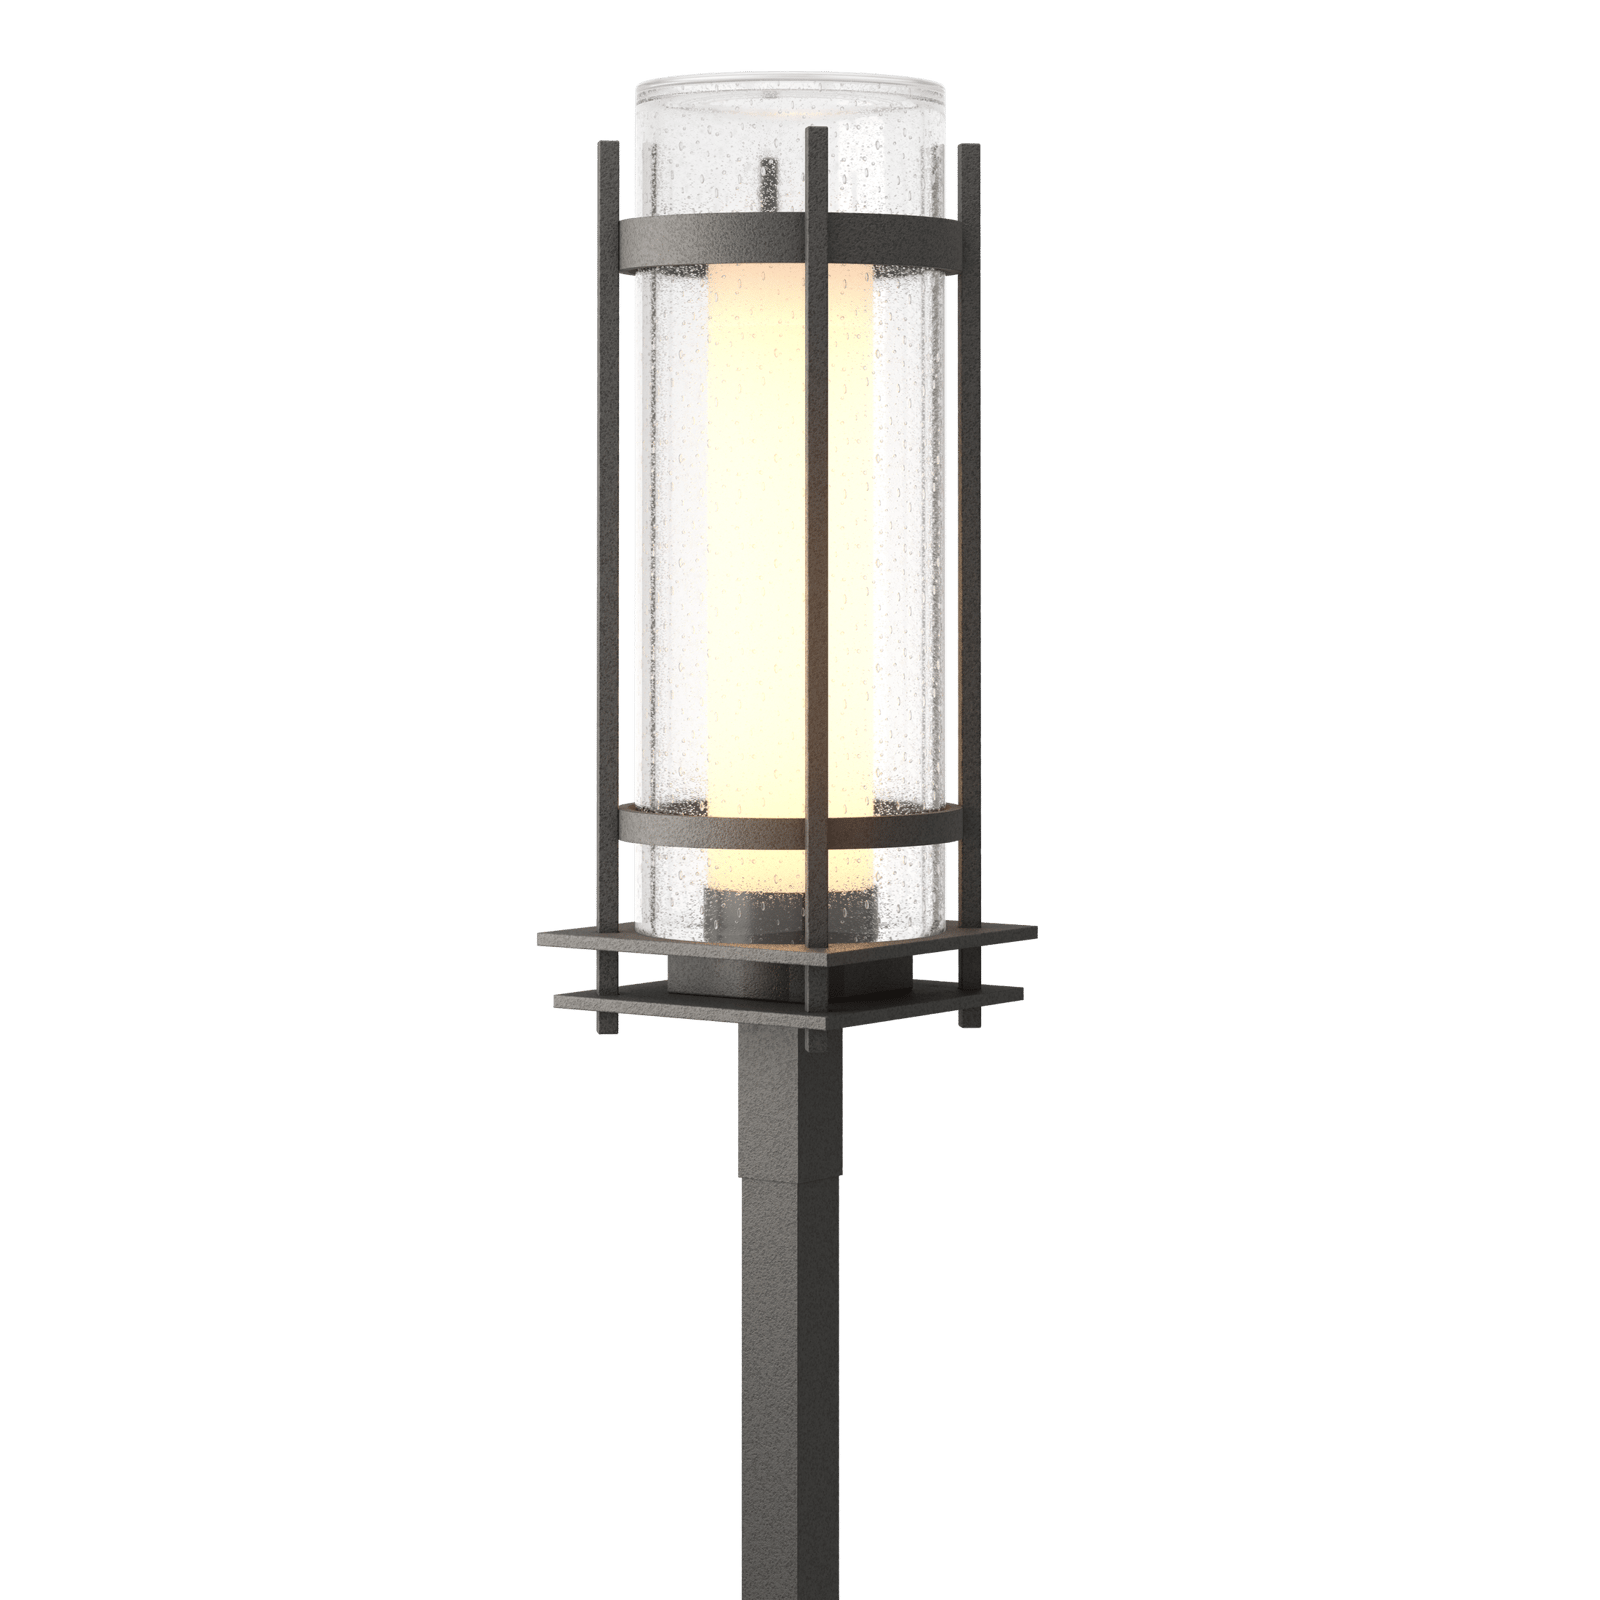 Hubbardton Forge Torch Outdoor Post Light Outdoor l Post/Pier Mounts Hubbardton Forge Coastal Natural Iron Seeded Glass with Opal Diffuser (ZS) 